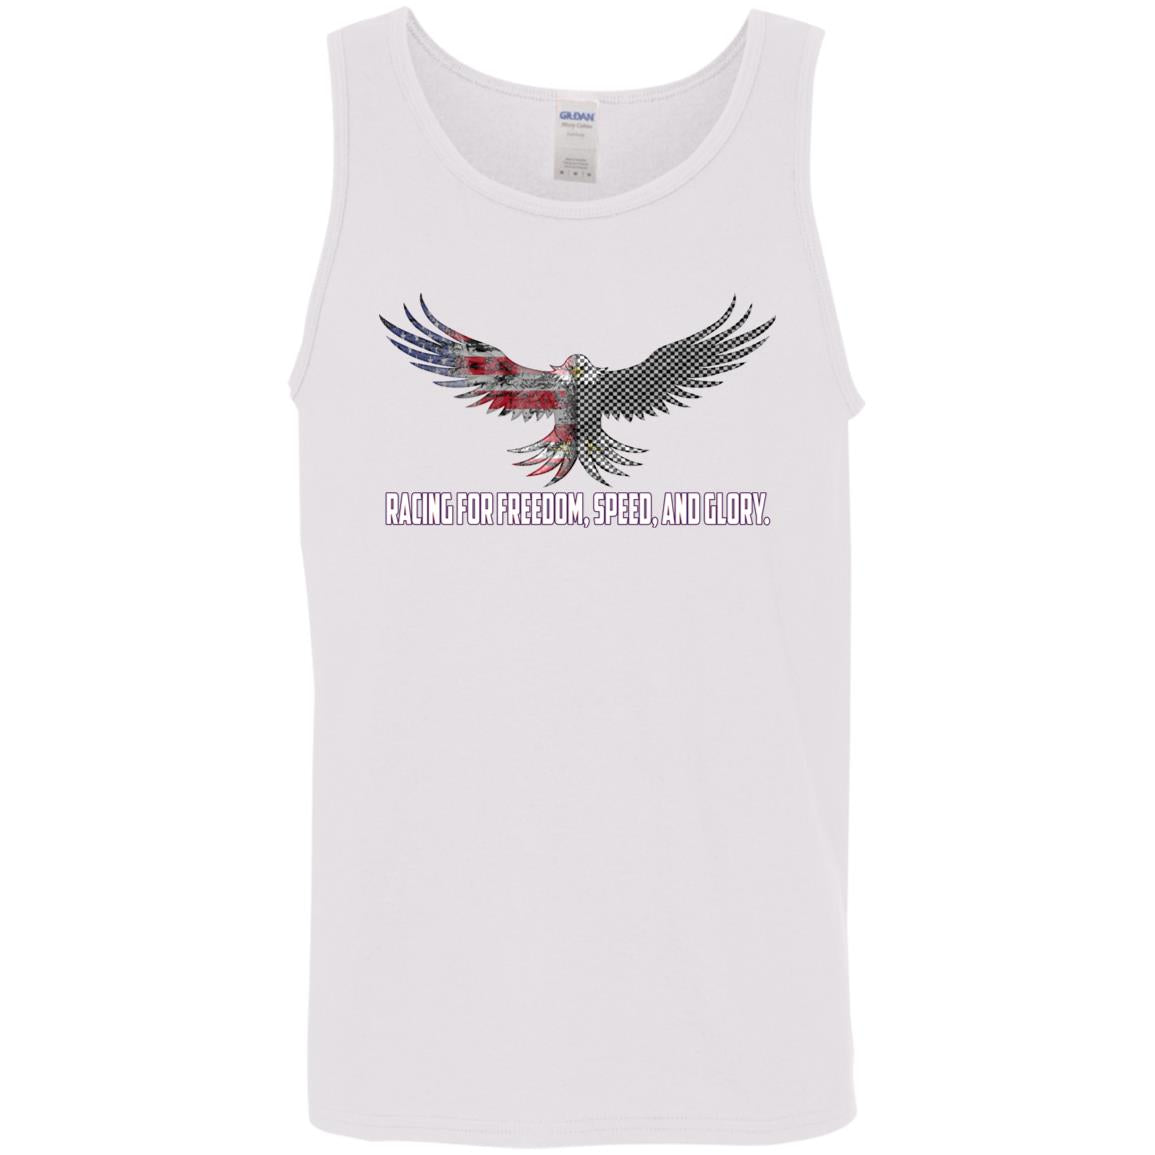 Racing For Freedom, Speed, And Glory Cotton Tank Top 5.3 oz.